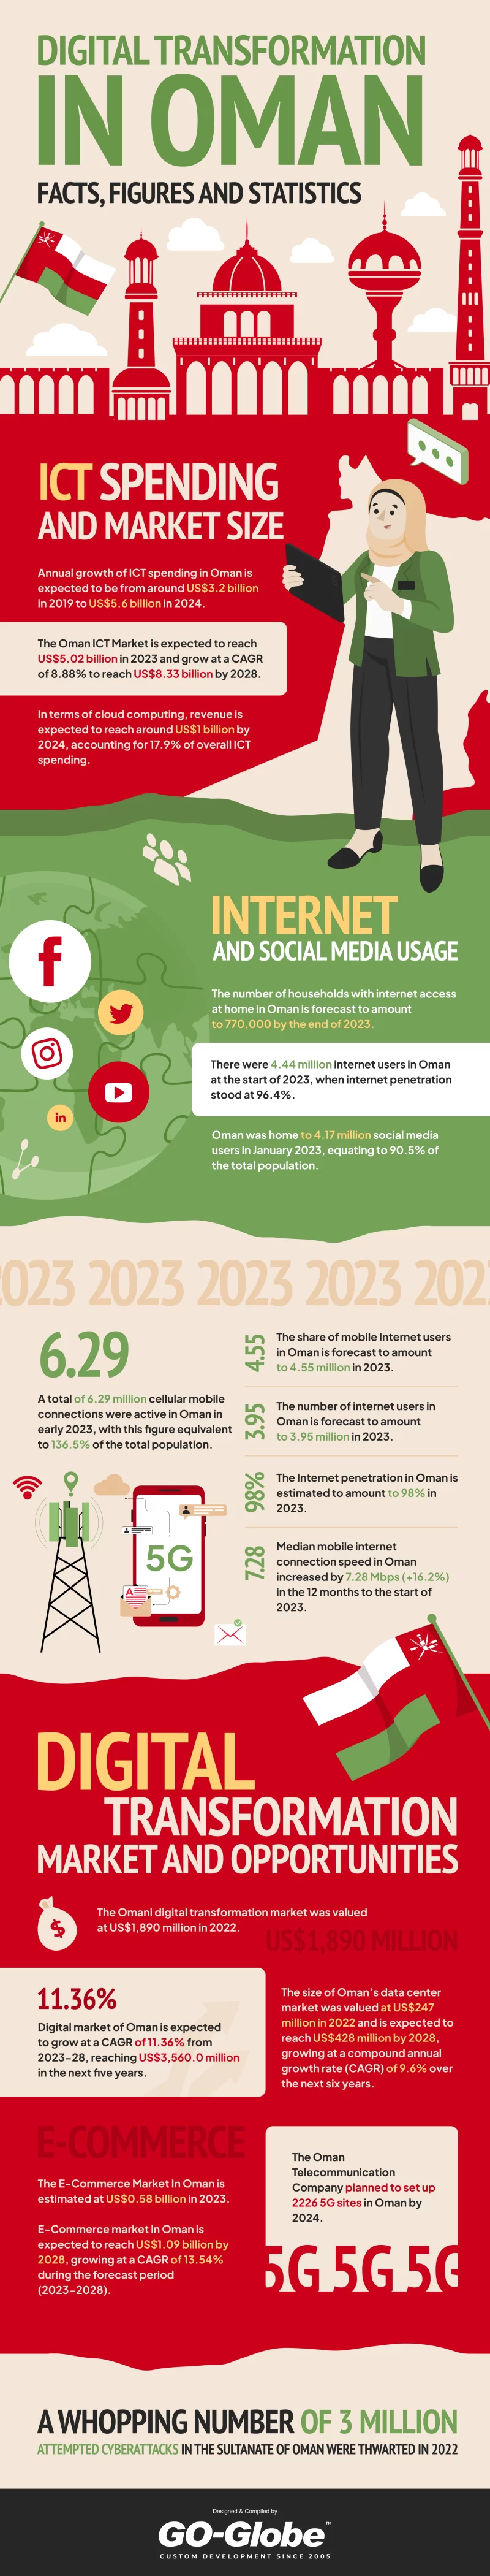 Digital Transformation in Oman_ Facts, Figures and Statistics